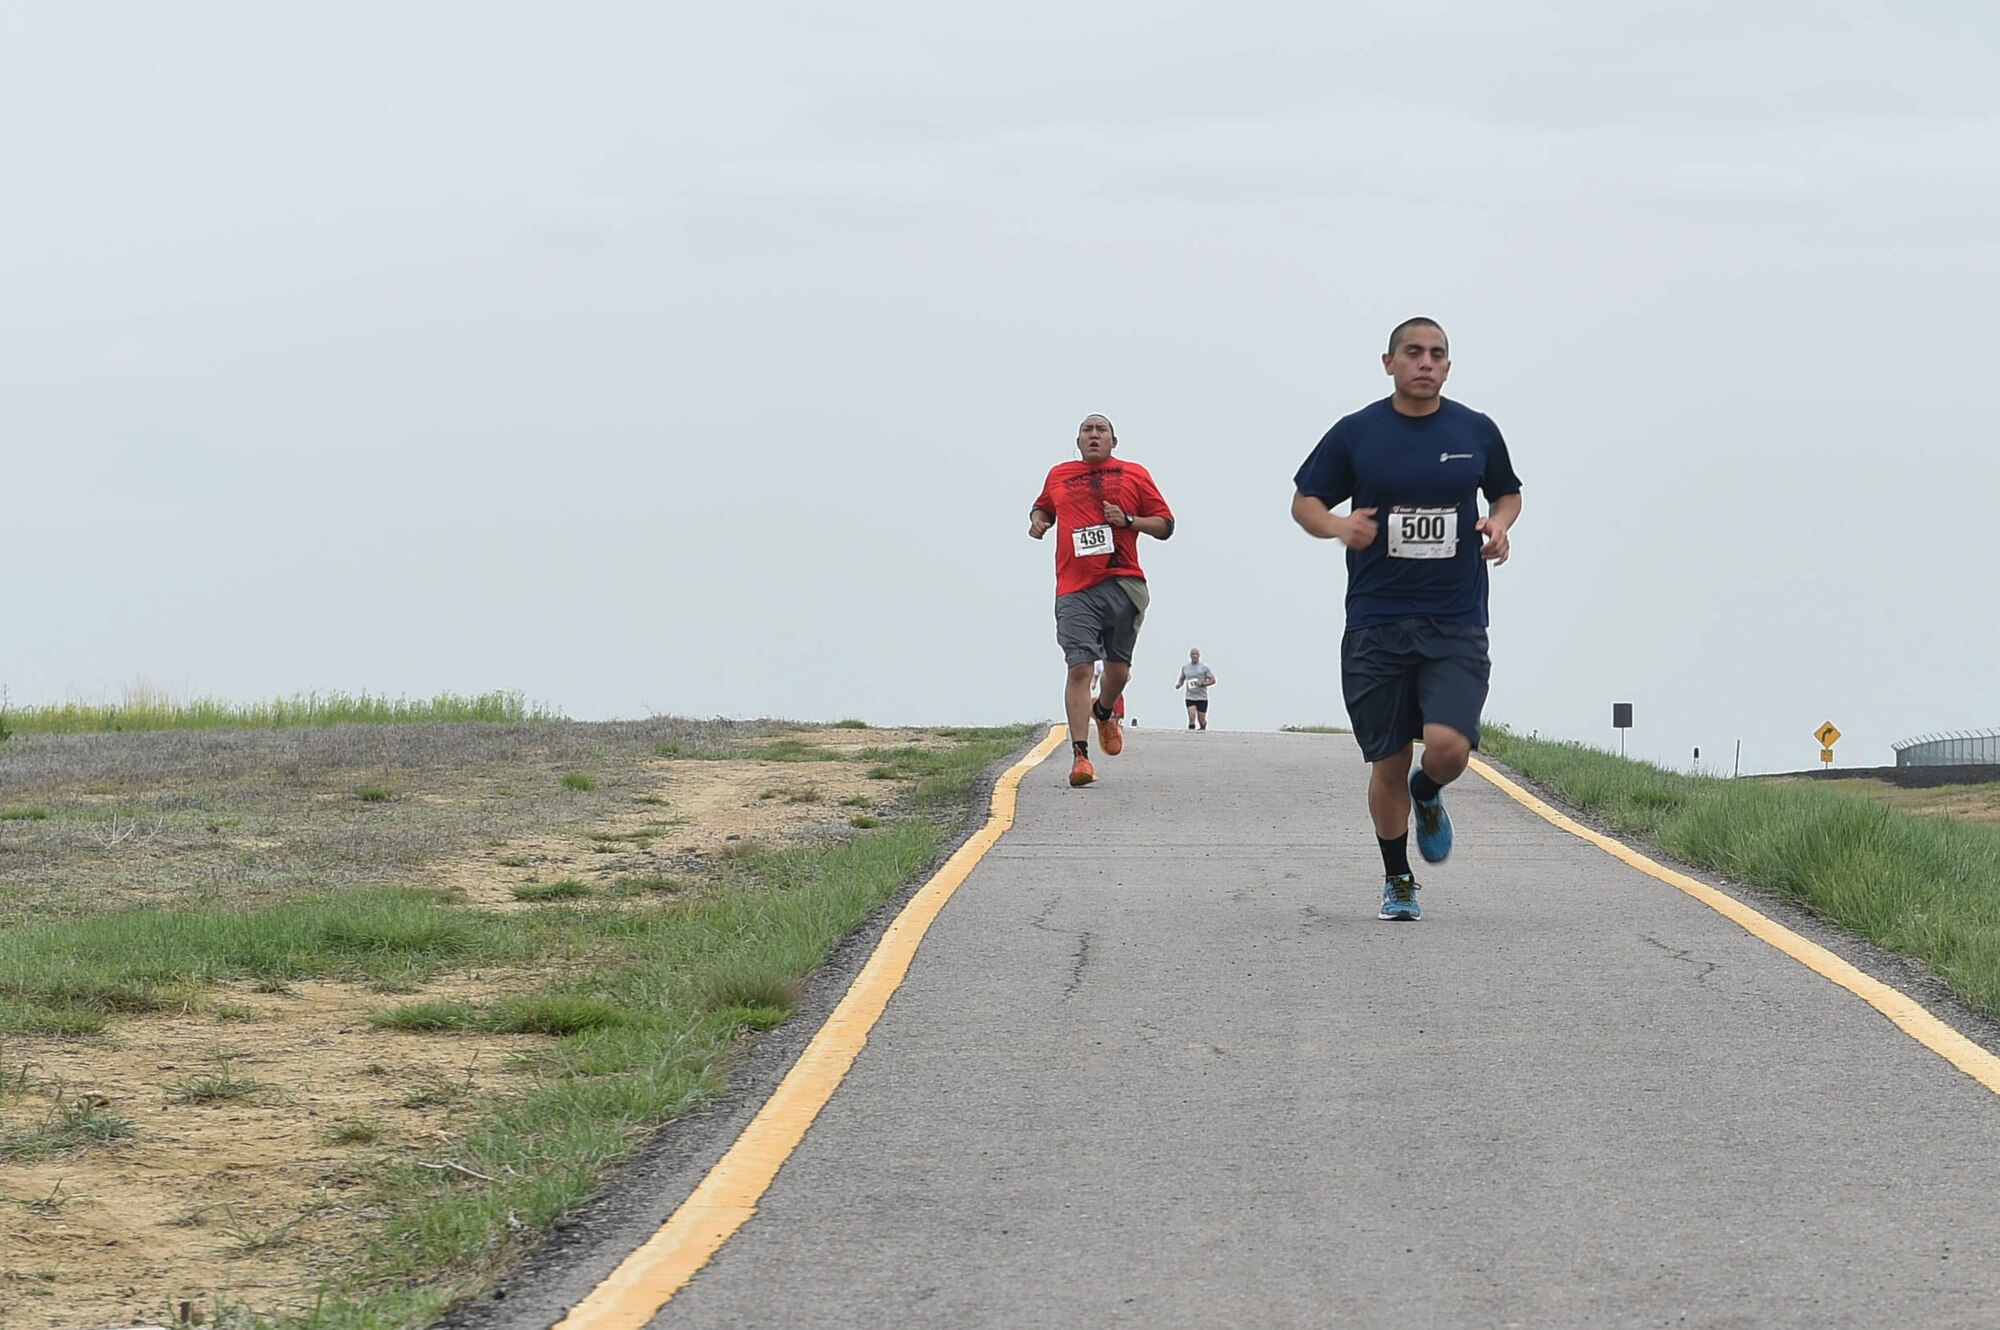 Team Buckley racers run in the Dash to Distance 8k May 13, 2015, at the outdoor track on Buckley Air Force Base, Colo. The Dash to Distance series started with an 8k and will gradually increase to a 12k, 10 mile and half marathon run. Prizes were awarded to top male and female finishers, along with Commander Cup points. (U.S. Air Force photo by Airman 1st Class Samantha Meadors/Released)